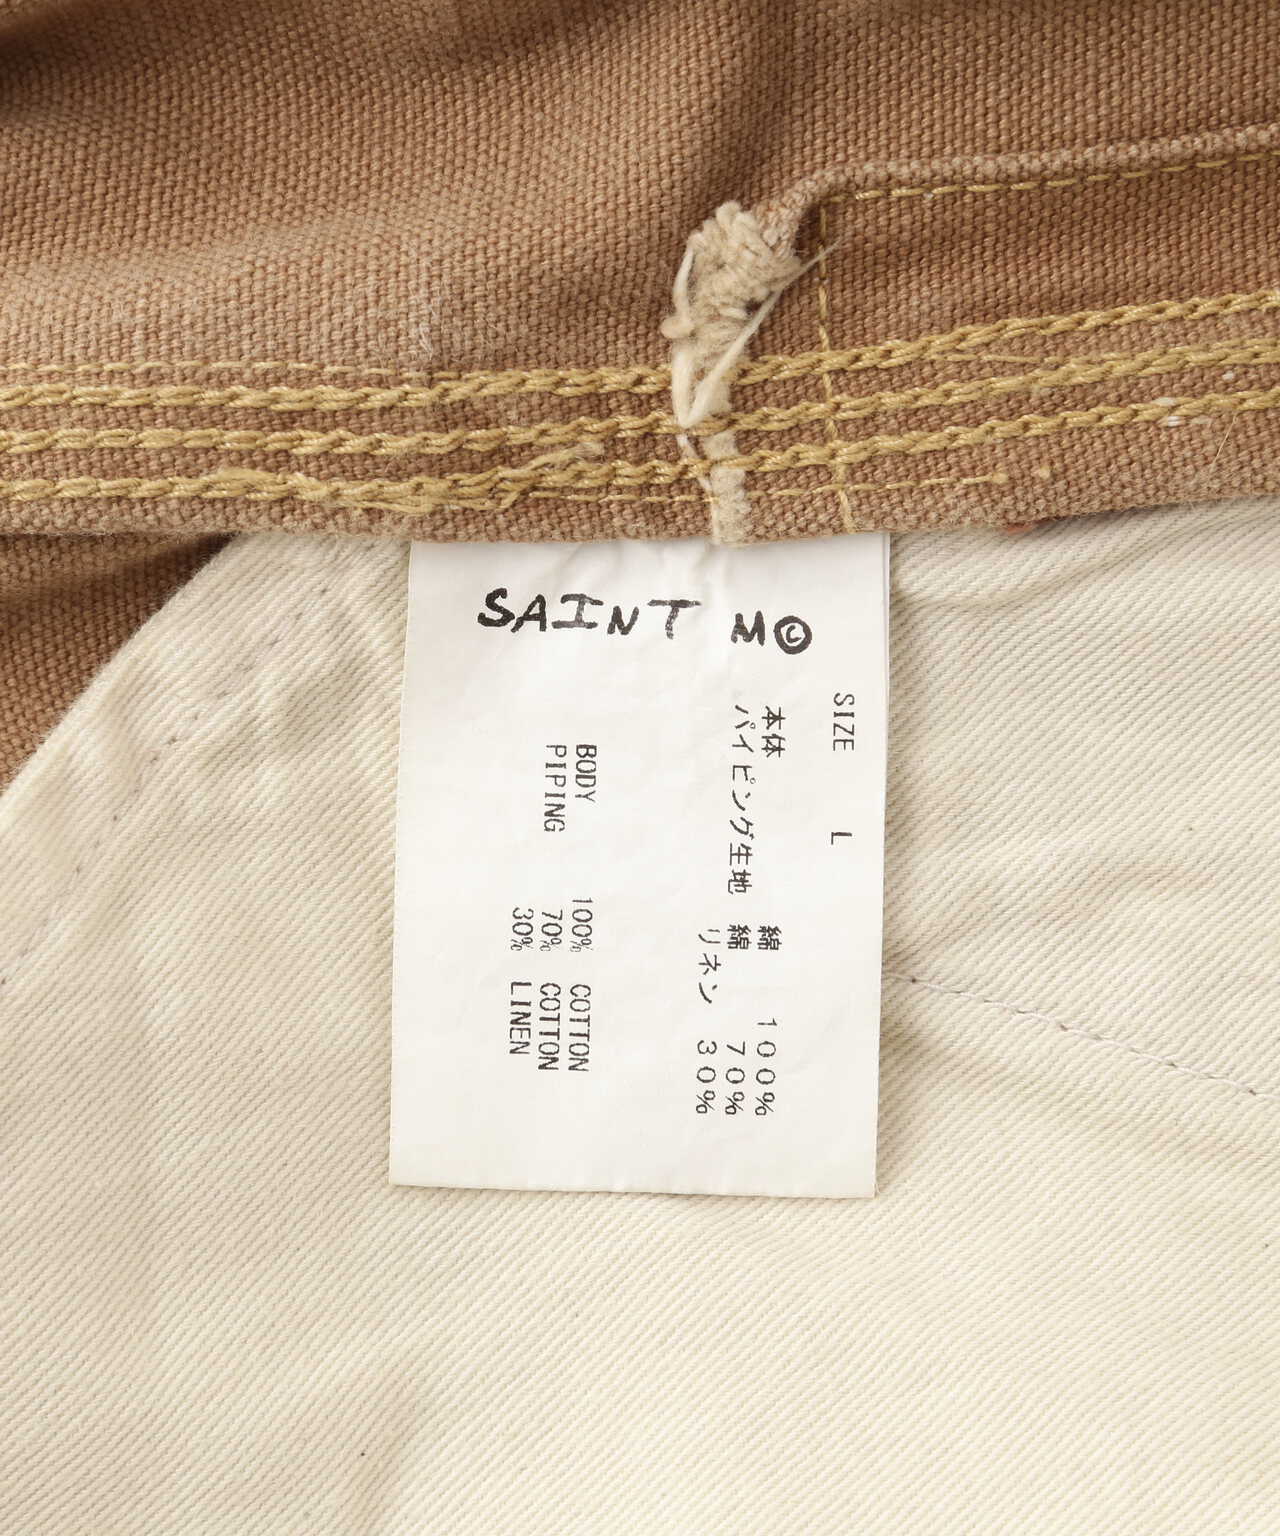 SAINT MICHAEL/セント マイケル/OVERALL/DOUBLE KNEE/BEIGE | ROYAL